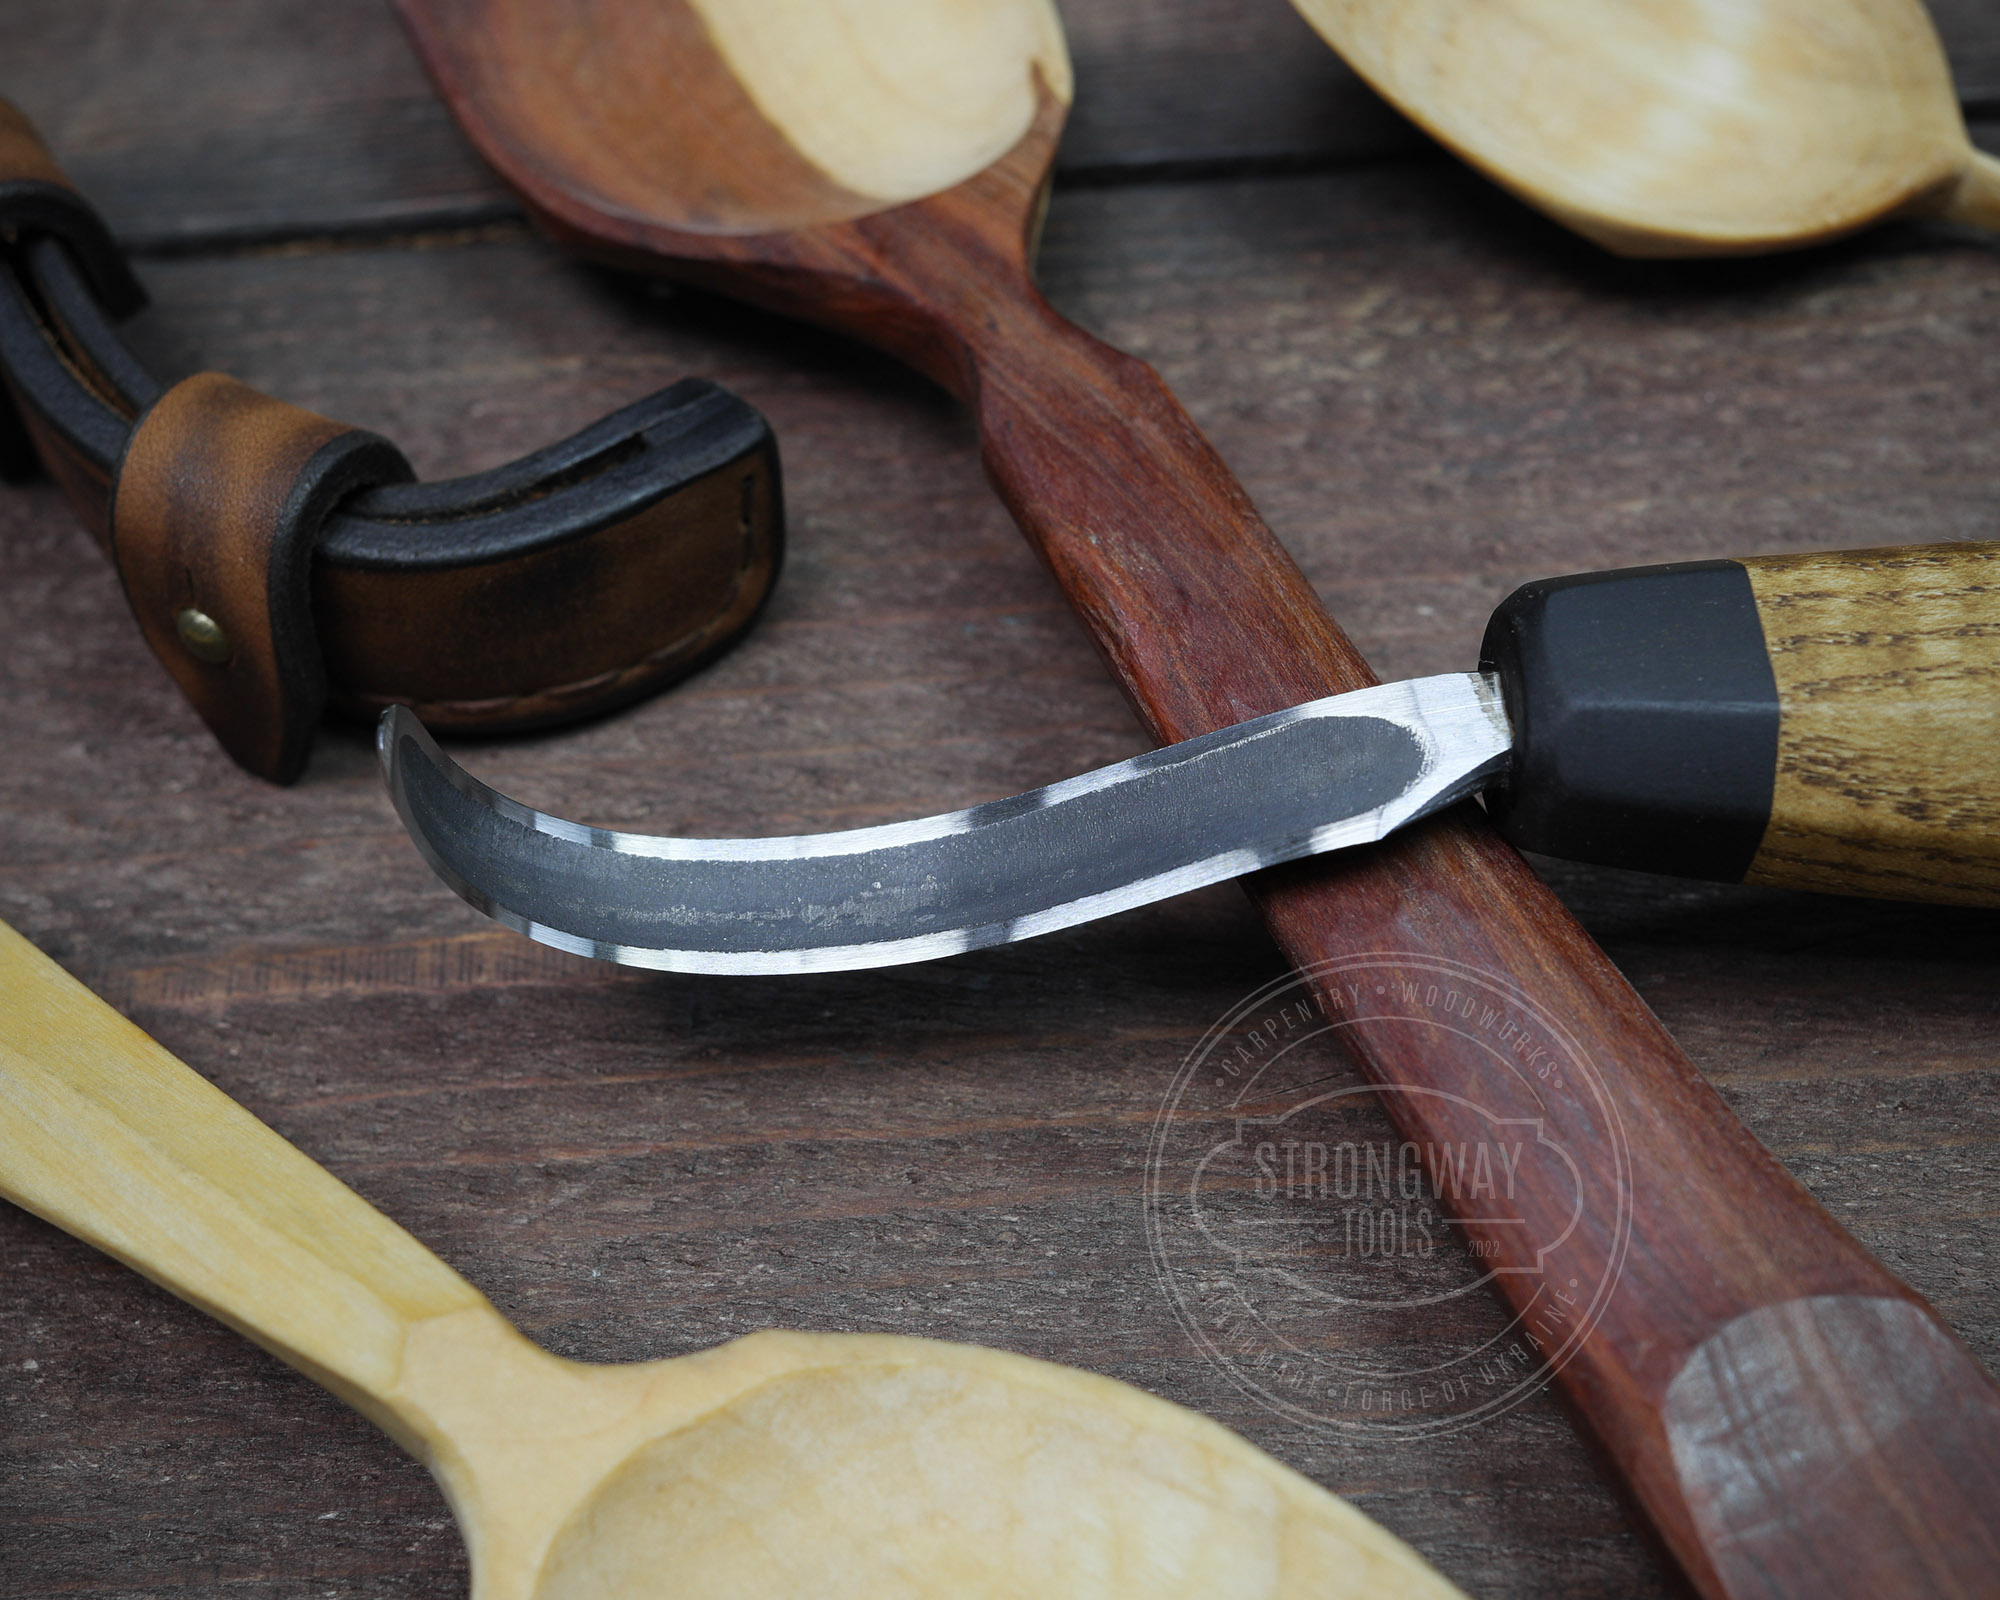 Spoon Carving Hook Knife №1 > STRONGWAY TOOLS, L.L.C.